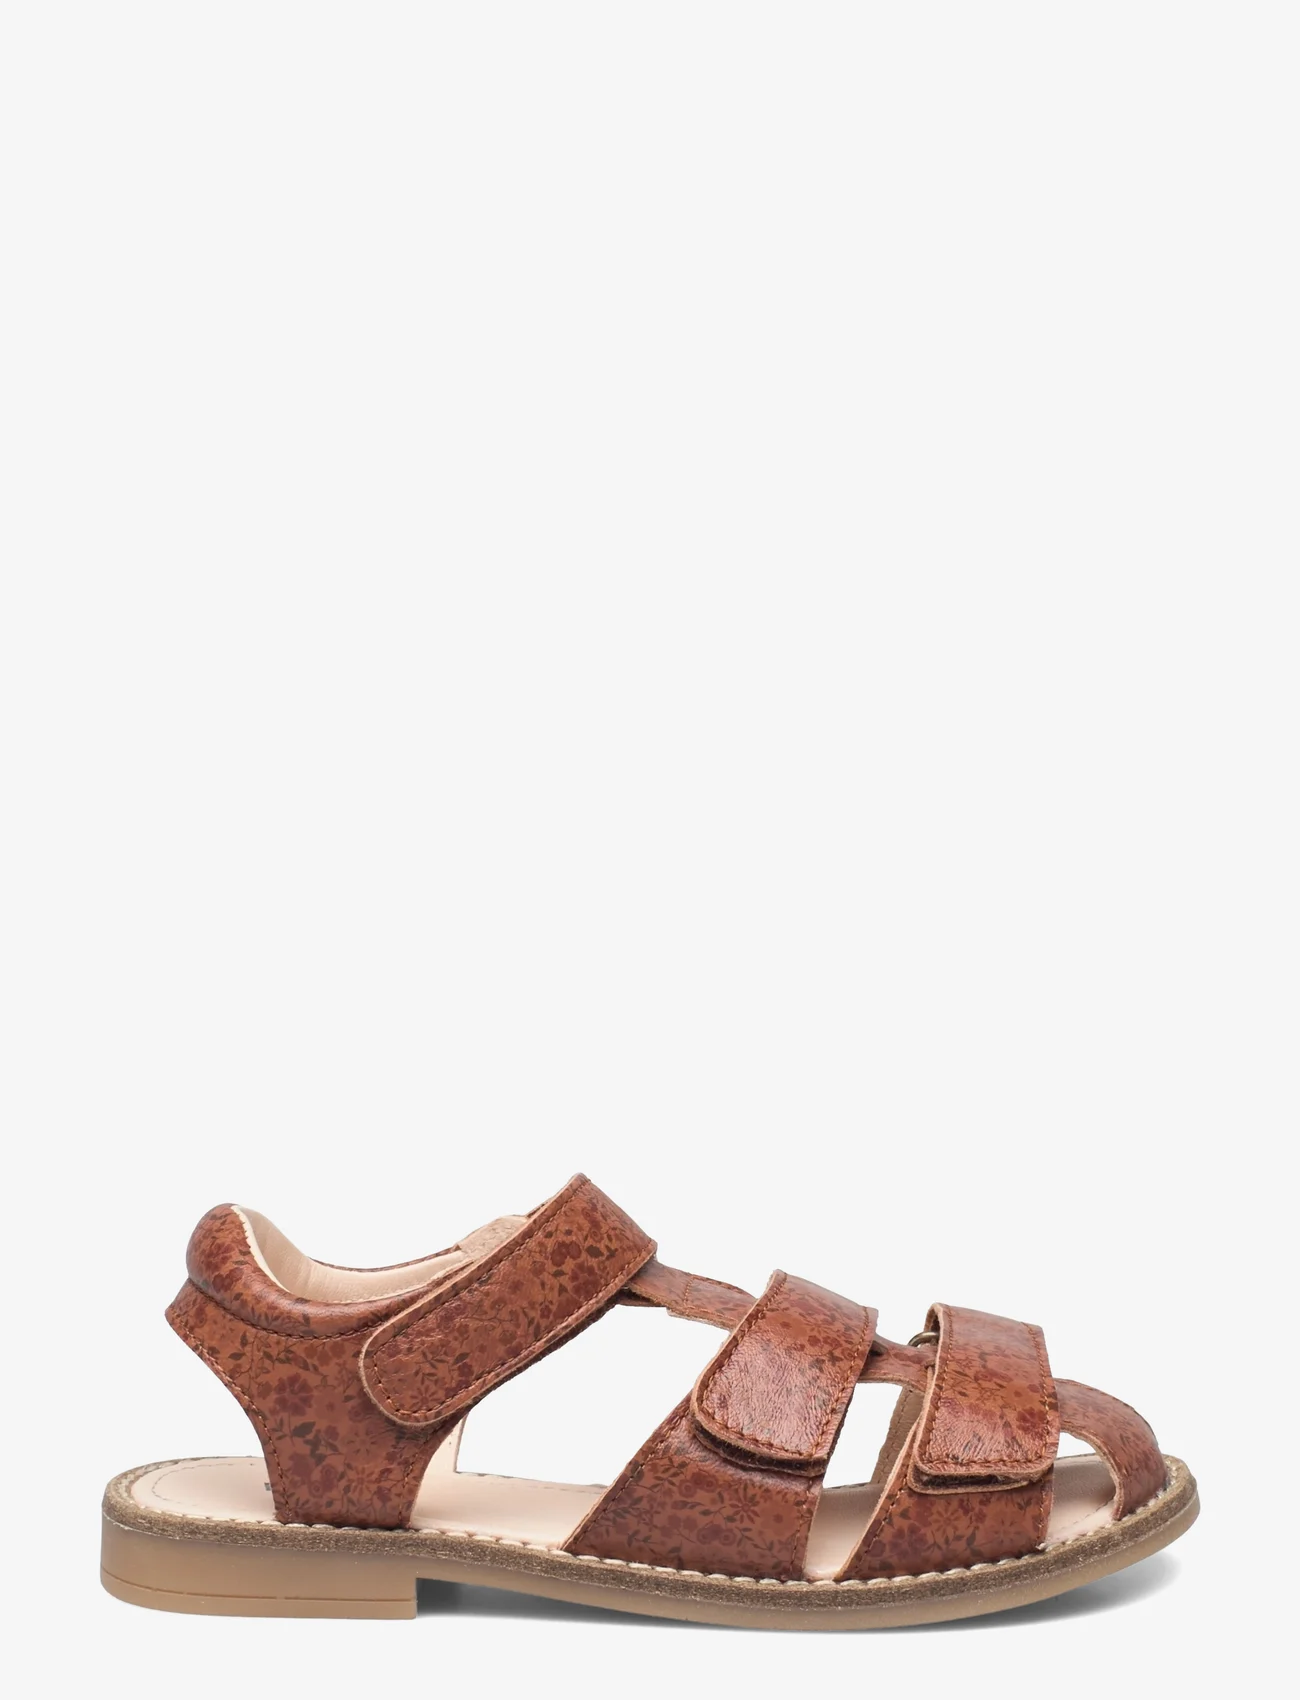 Wheat - Addison AOP sandal - sommarfynd - amber brown flowers - 1